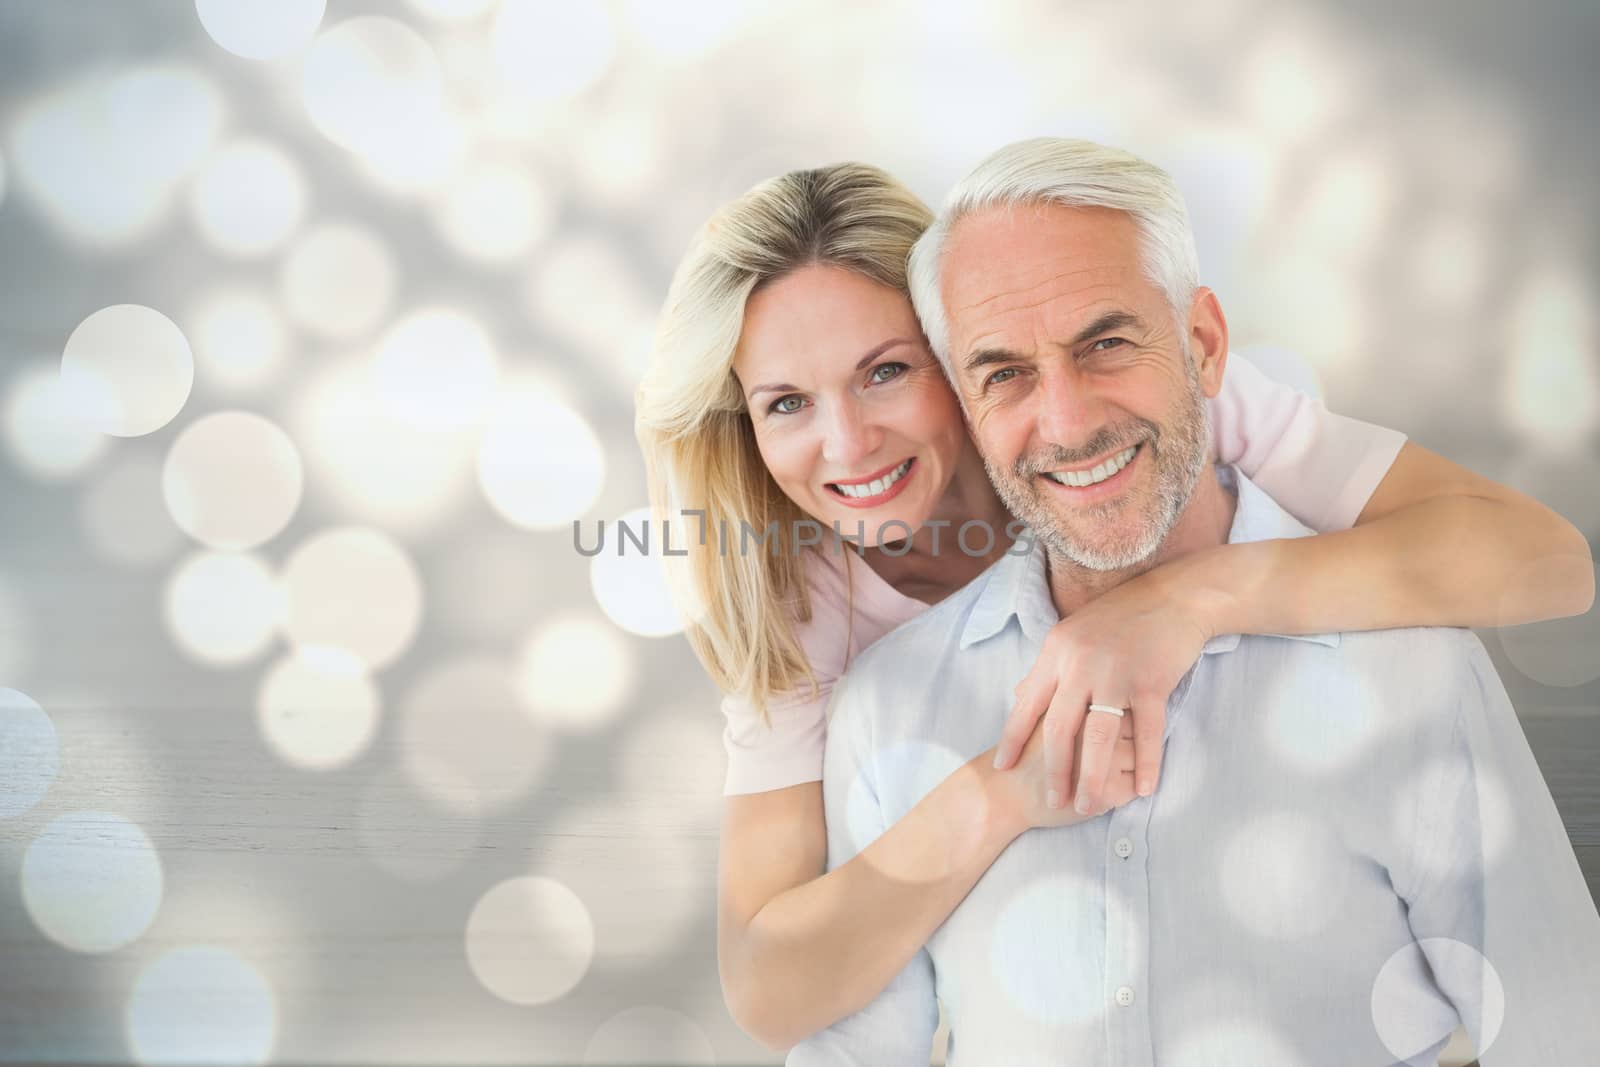 Smiling couple embracing and looking at camera against light circles on bright background